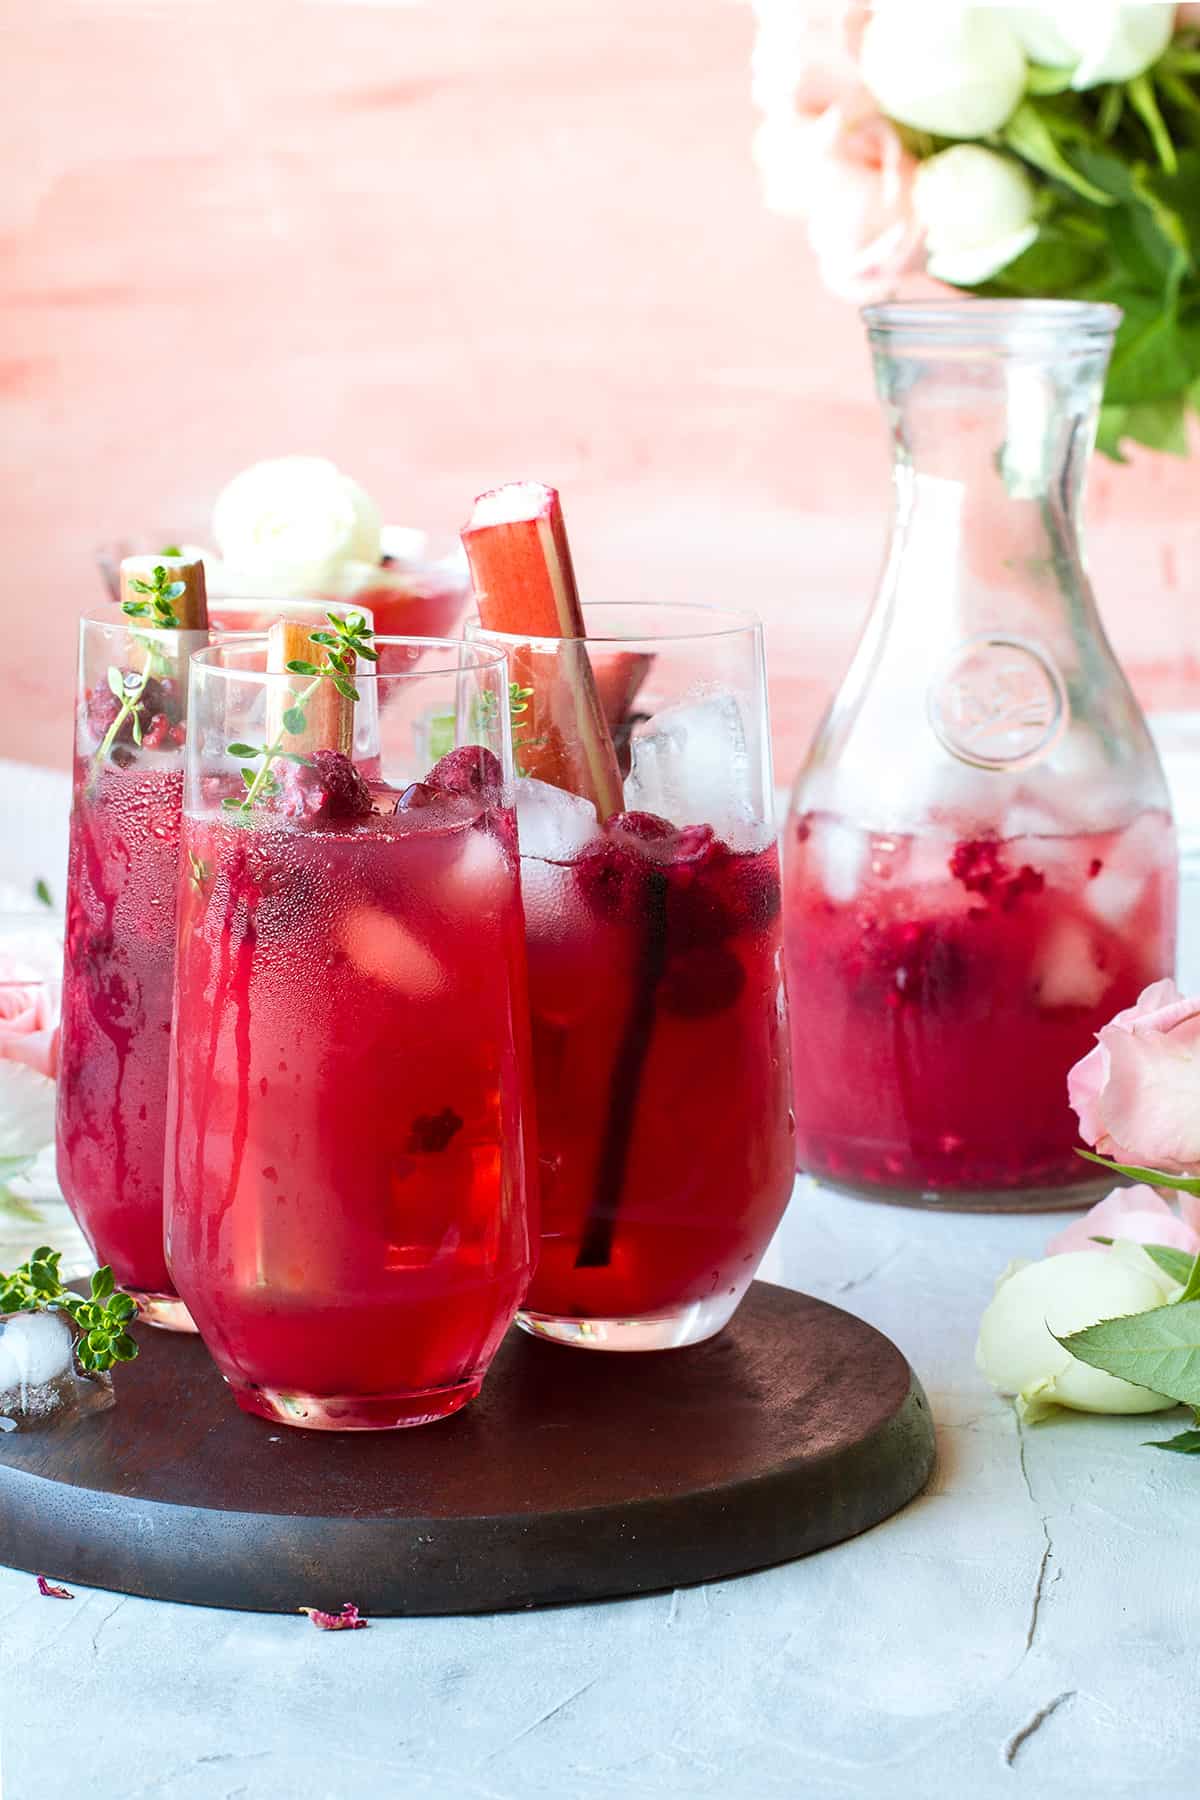 Three glasses with pink iced tea in the front and a decanted in the background.